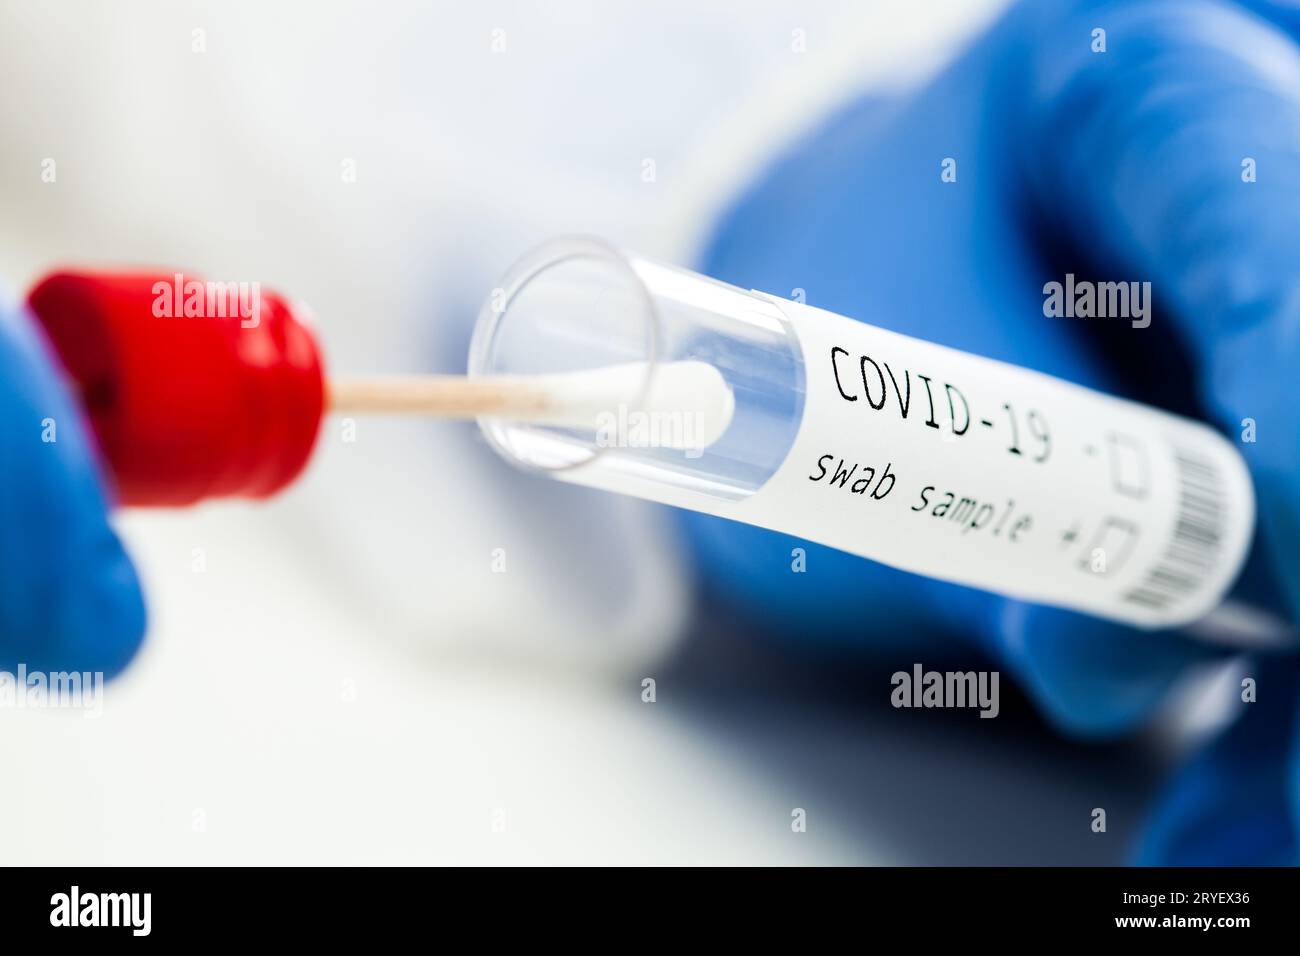 Rt-PCR COVID-19 virus disease diagnostic test,UK lab technician wearing blue protective glove holding test tube with swabbing st Stock Photo